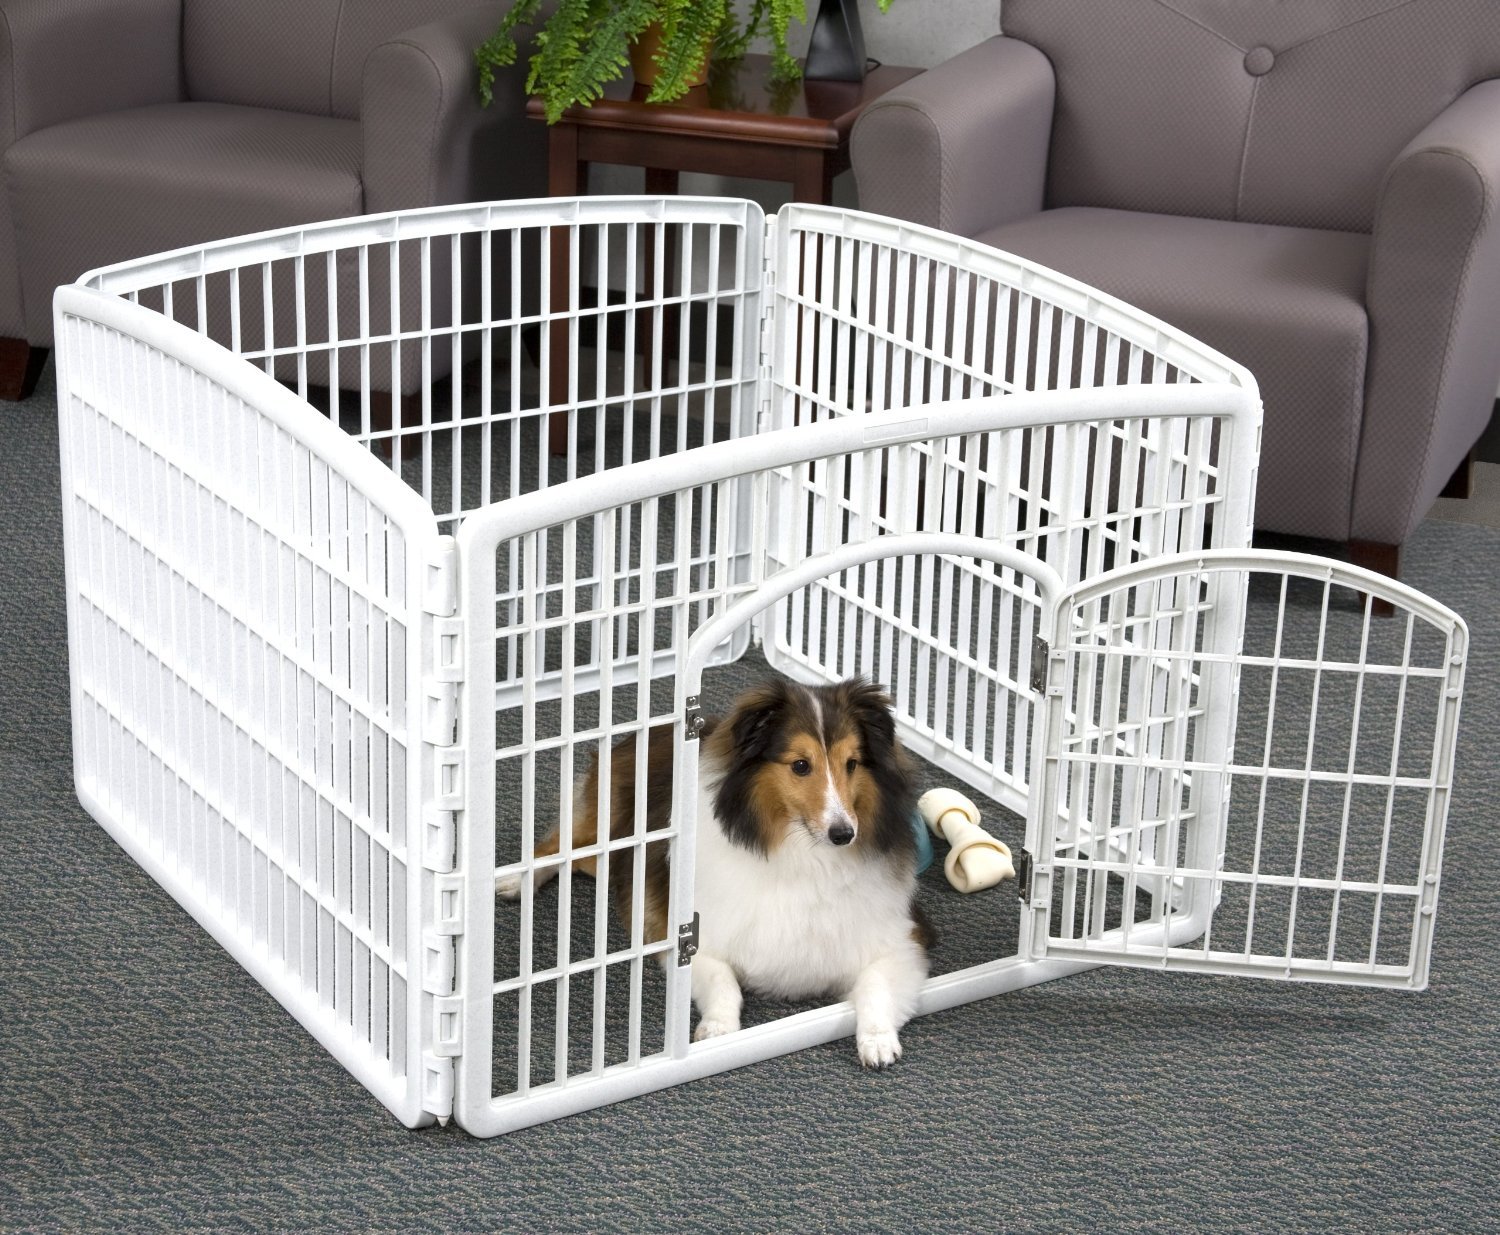 4 Panel Containment Gate Fence For Pet Pen Dog Puppy Plastic And Exercise Indoor Fences